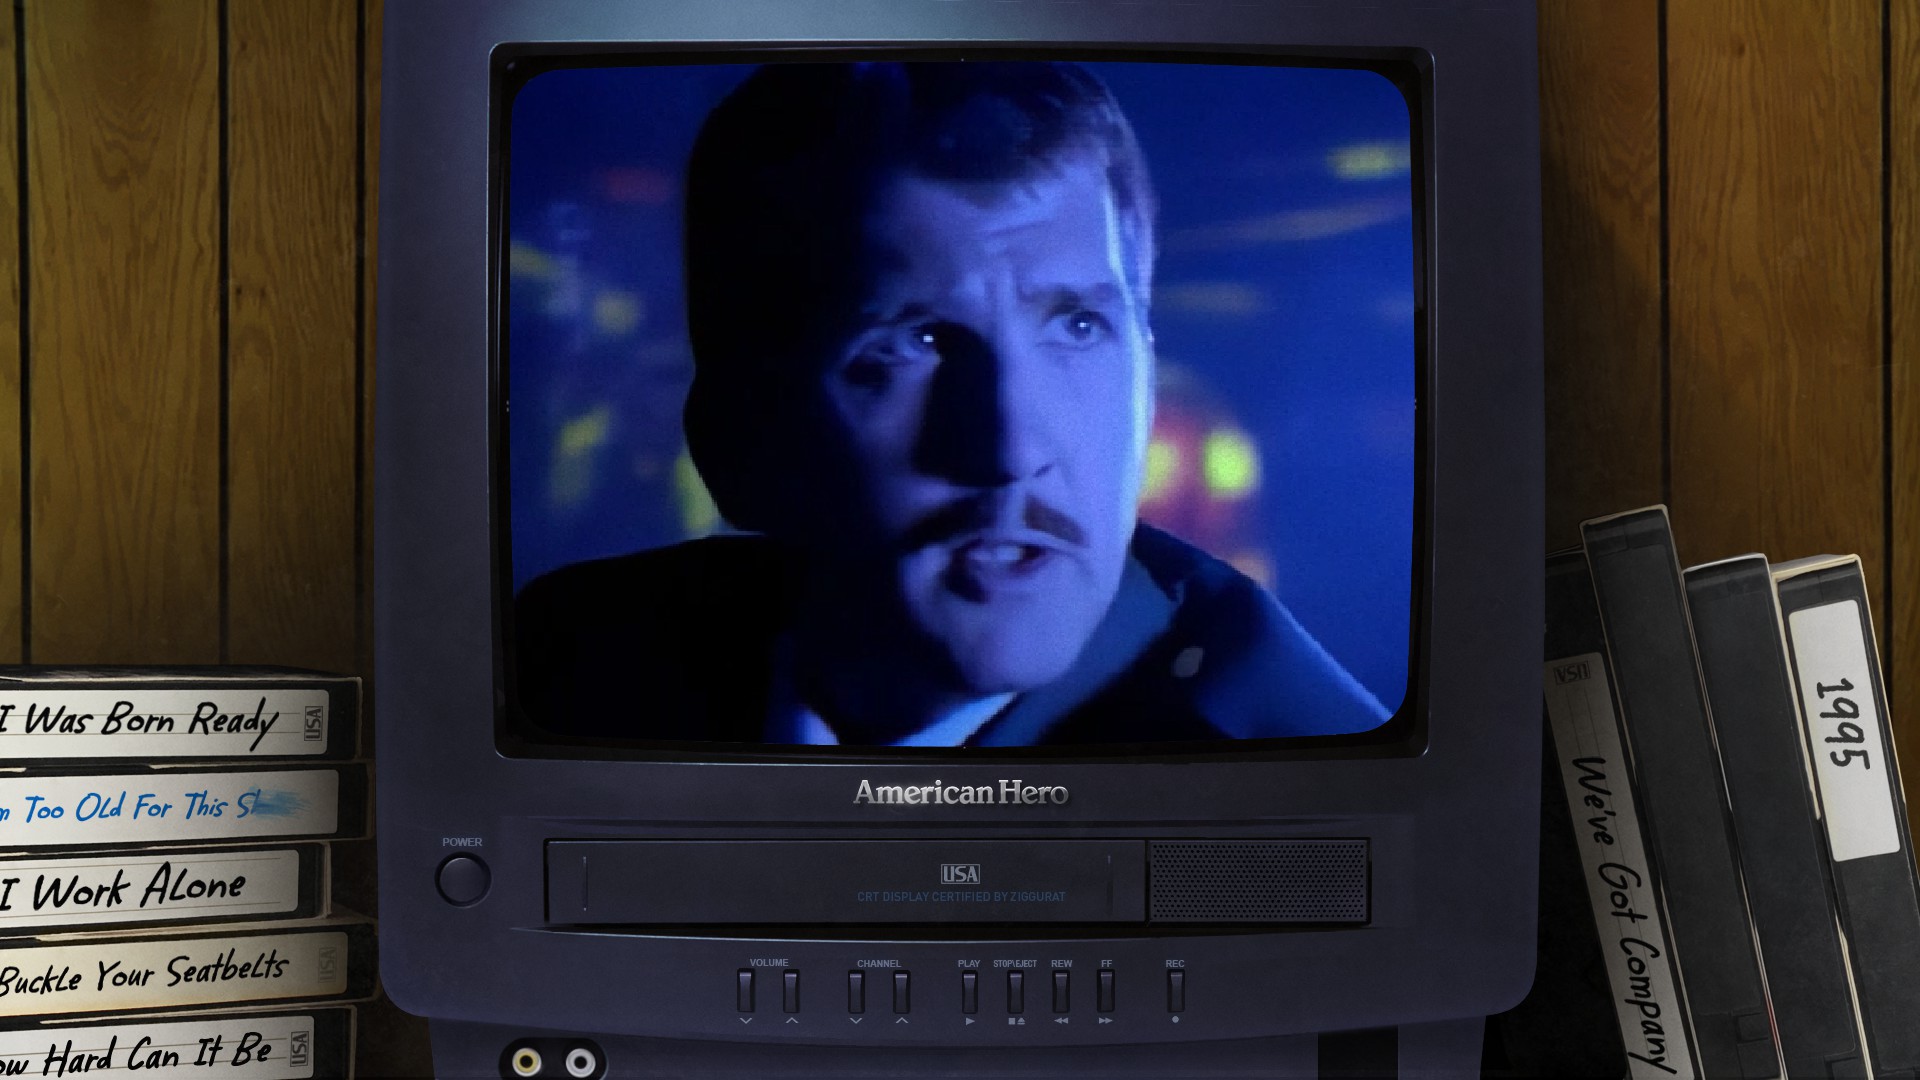  Cancelled 1990s FMV game American Hero returns for some reason 